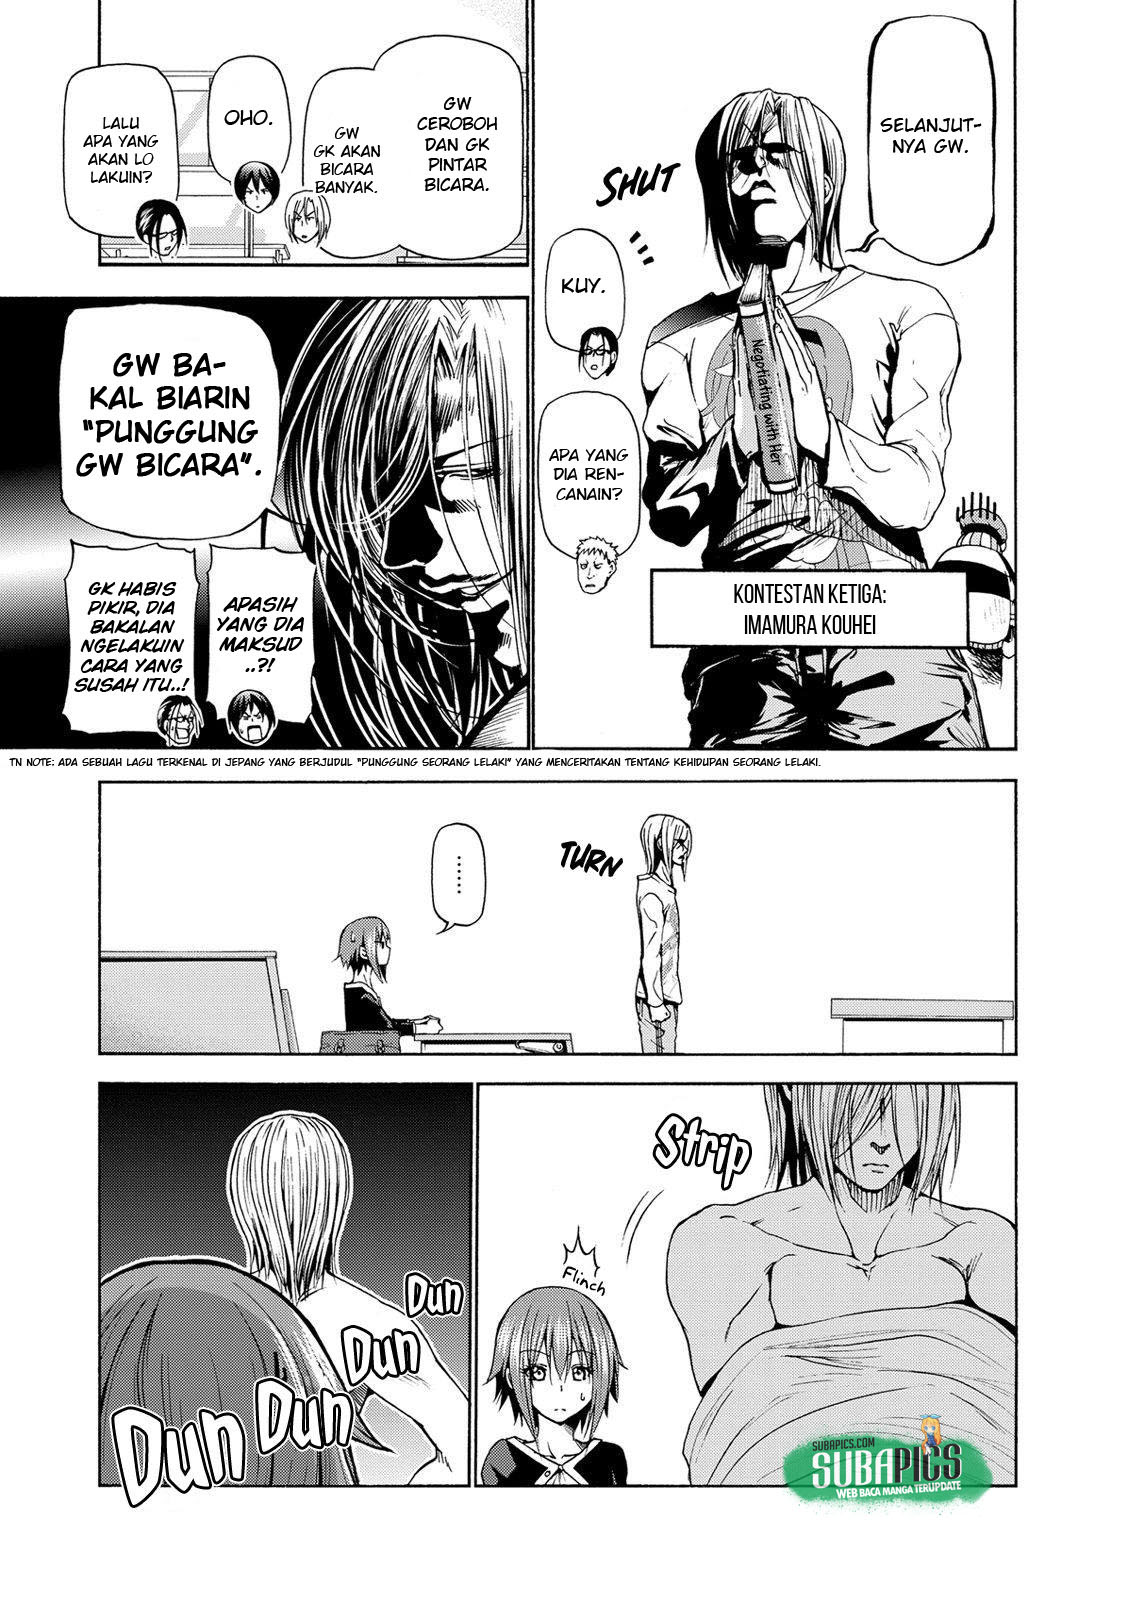 Grand Blue Chapter 23